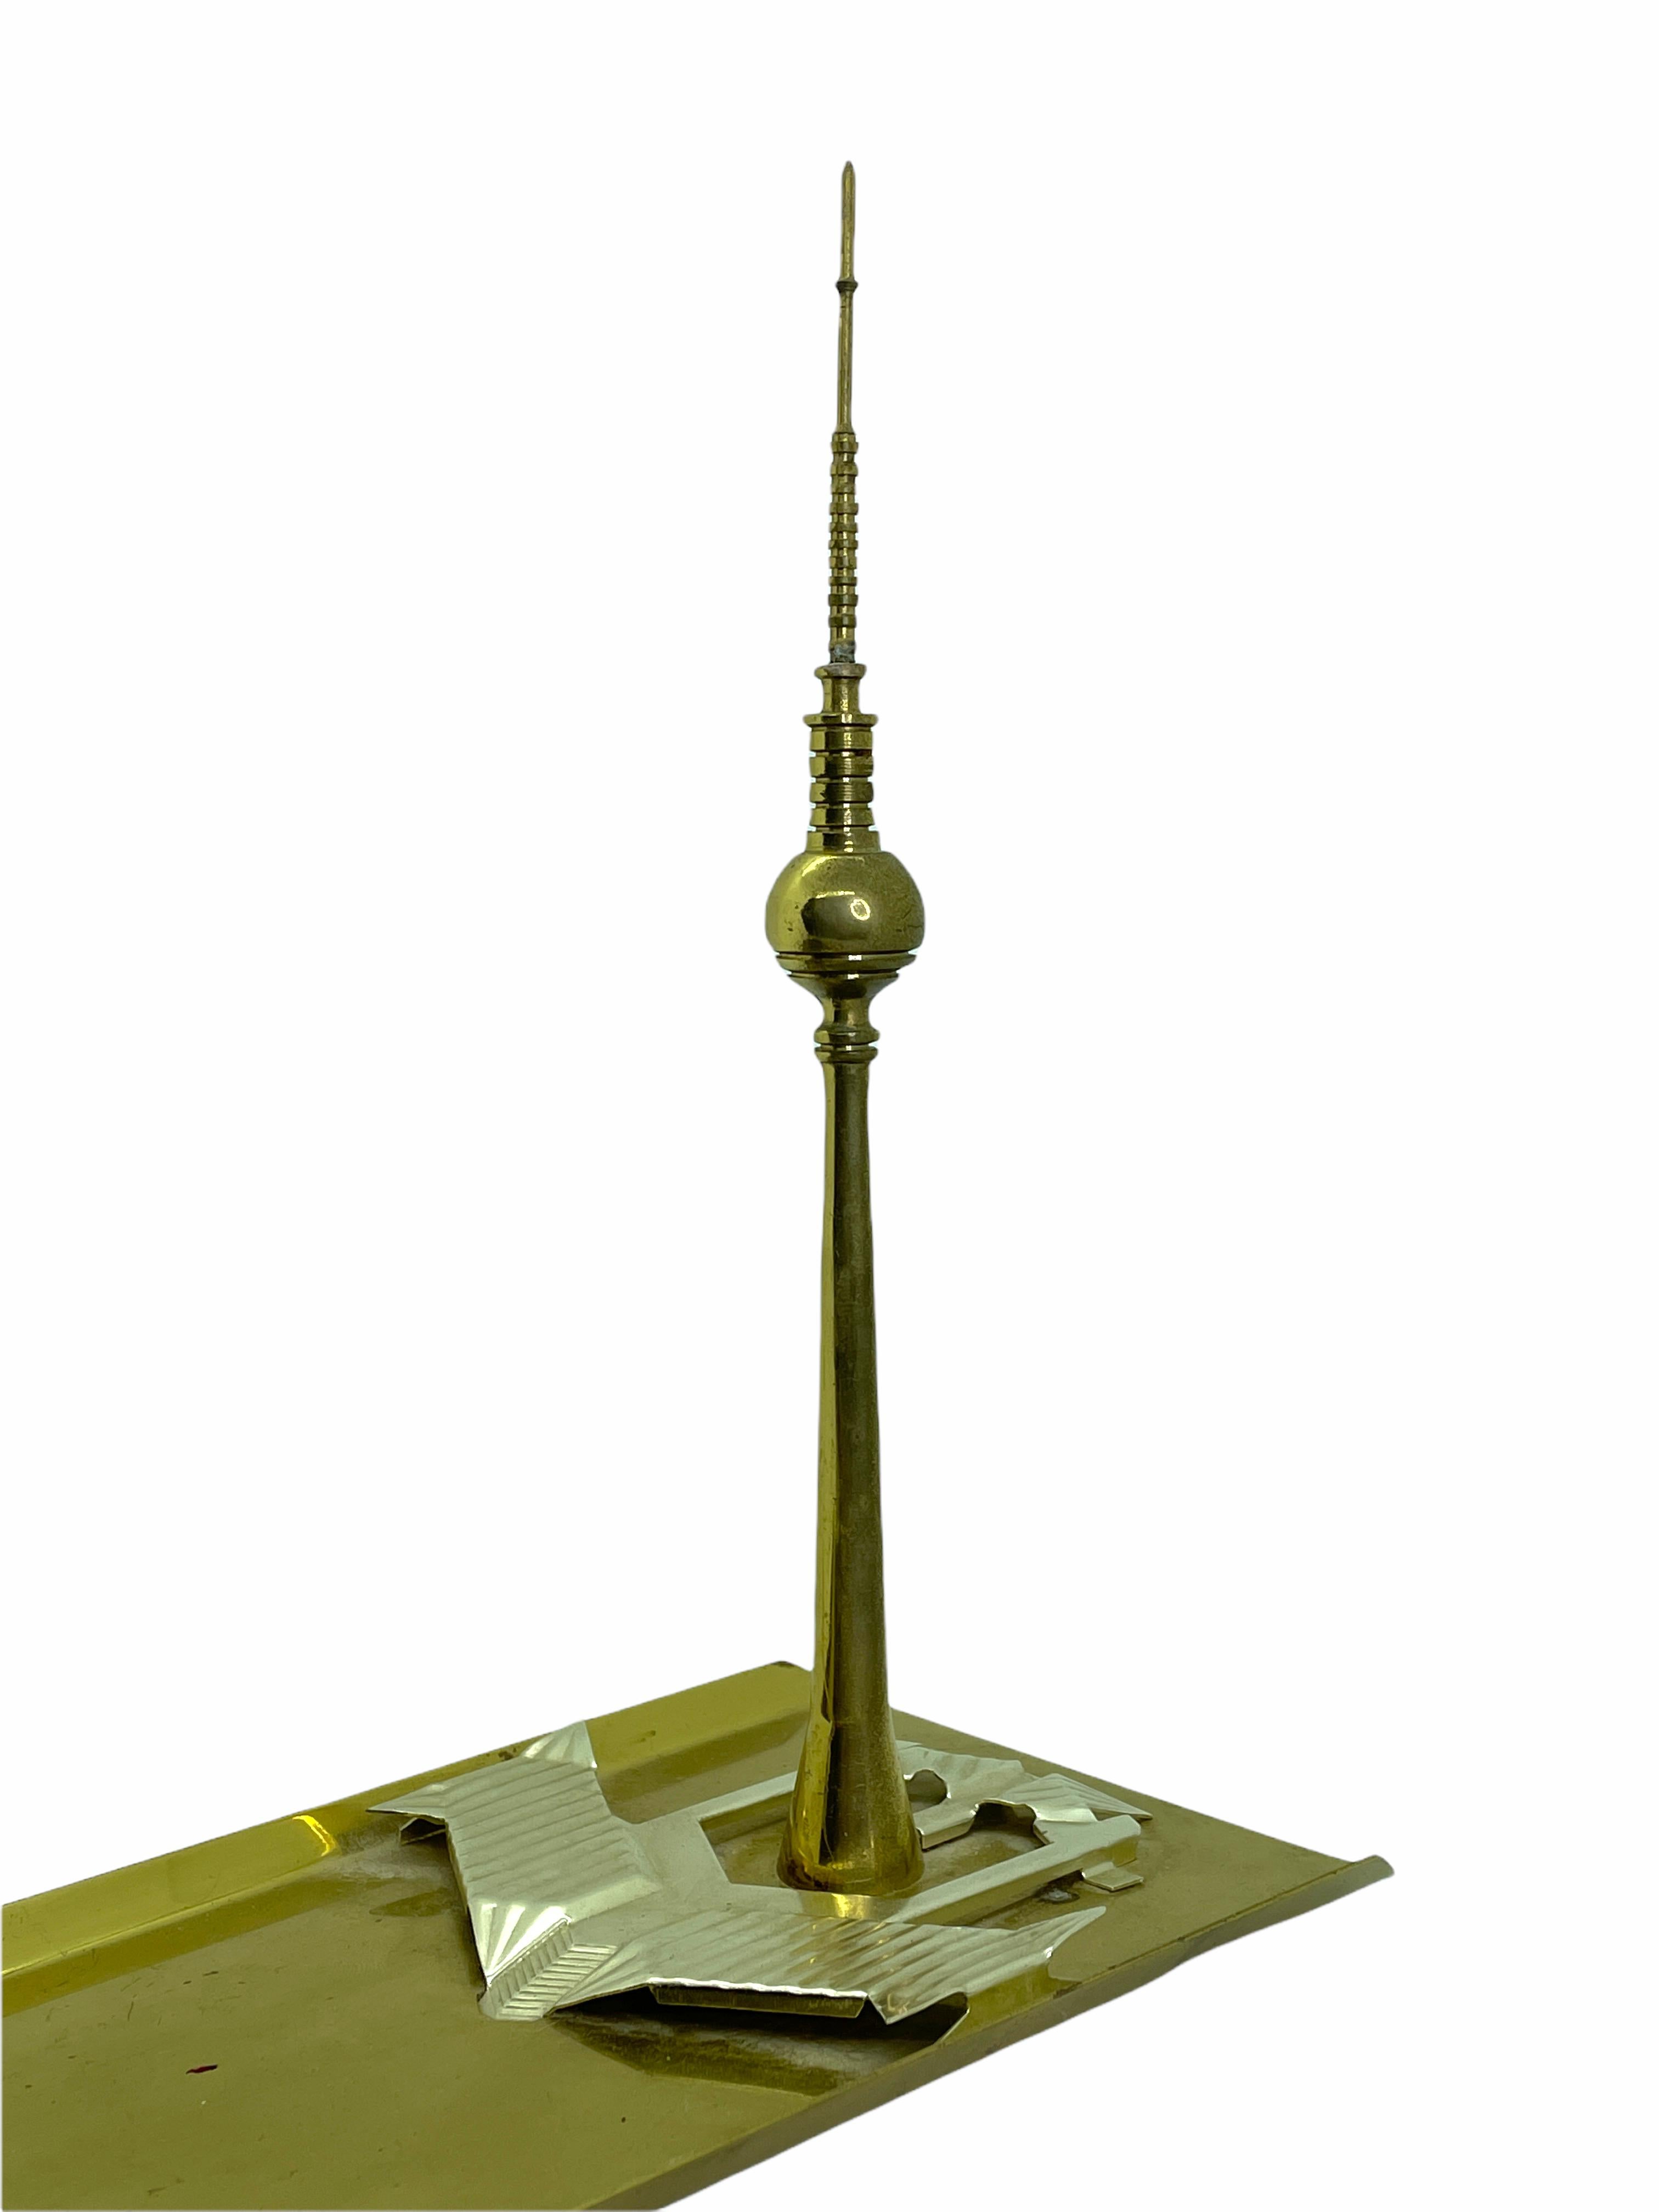 Scaled model of the Berlin television tower. Hand-spun in metal on a metal base. A nice architectural sculpture for every living room or desktop. Use it at a catchall, business card tray or just as a pen holder at your desktop. It measures